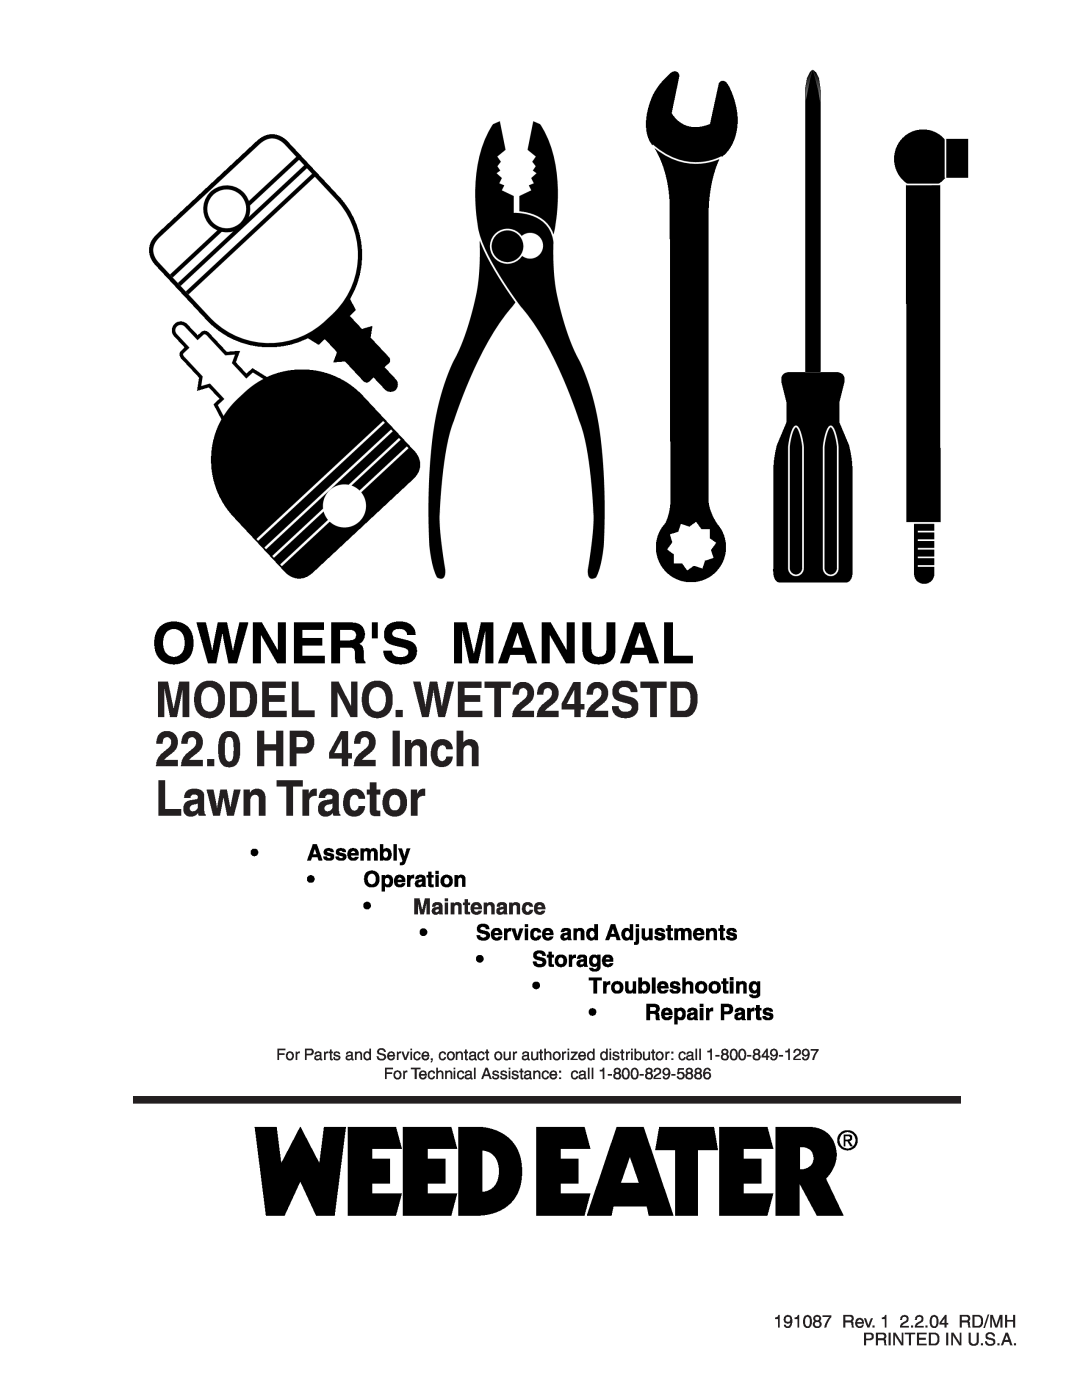 Weed Eater manual MODEL NO. WET2242STD 22.0 HP 42 Inch Lawn Tractor 